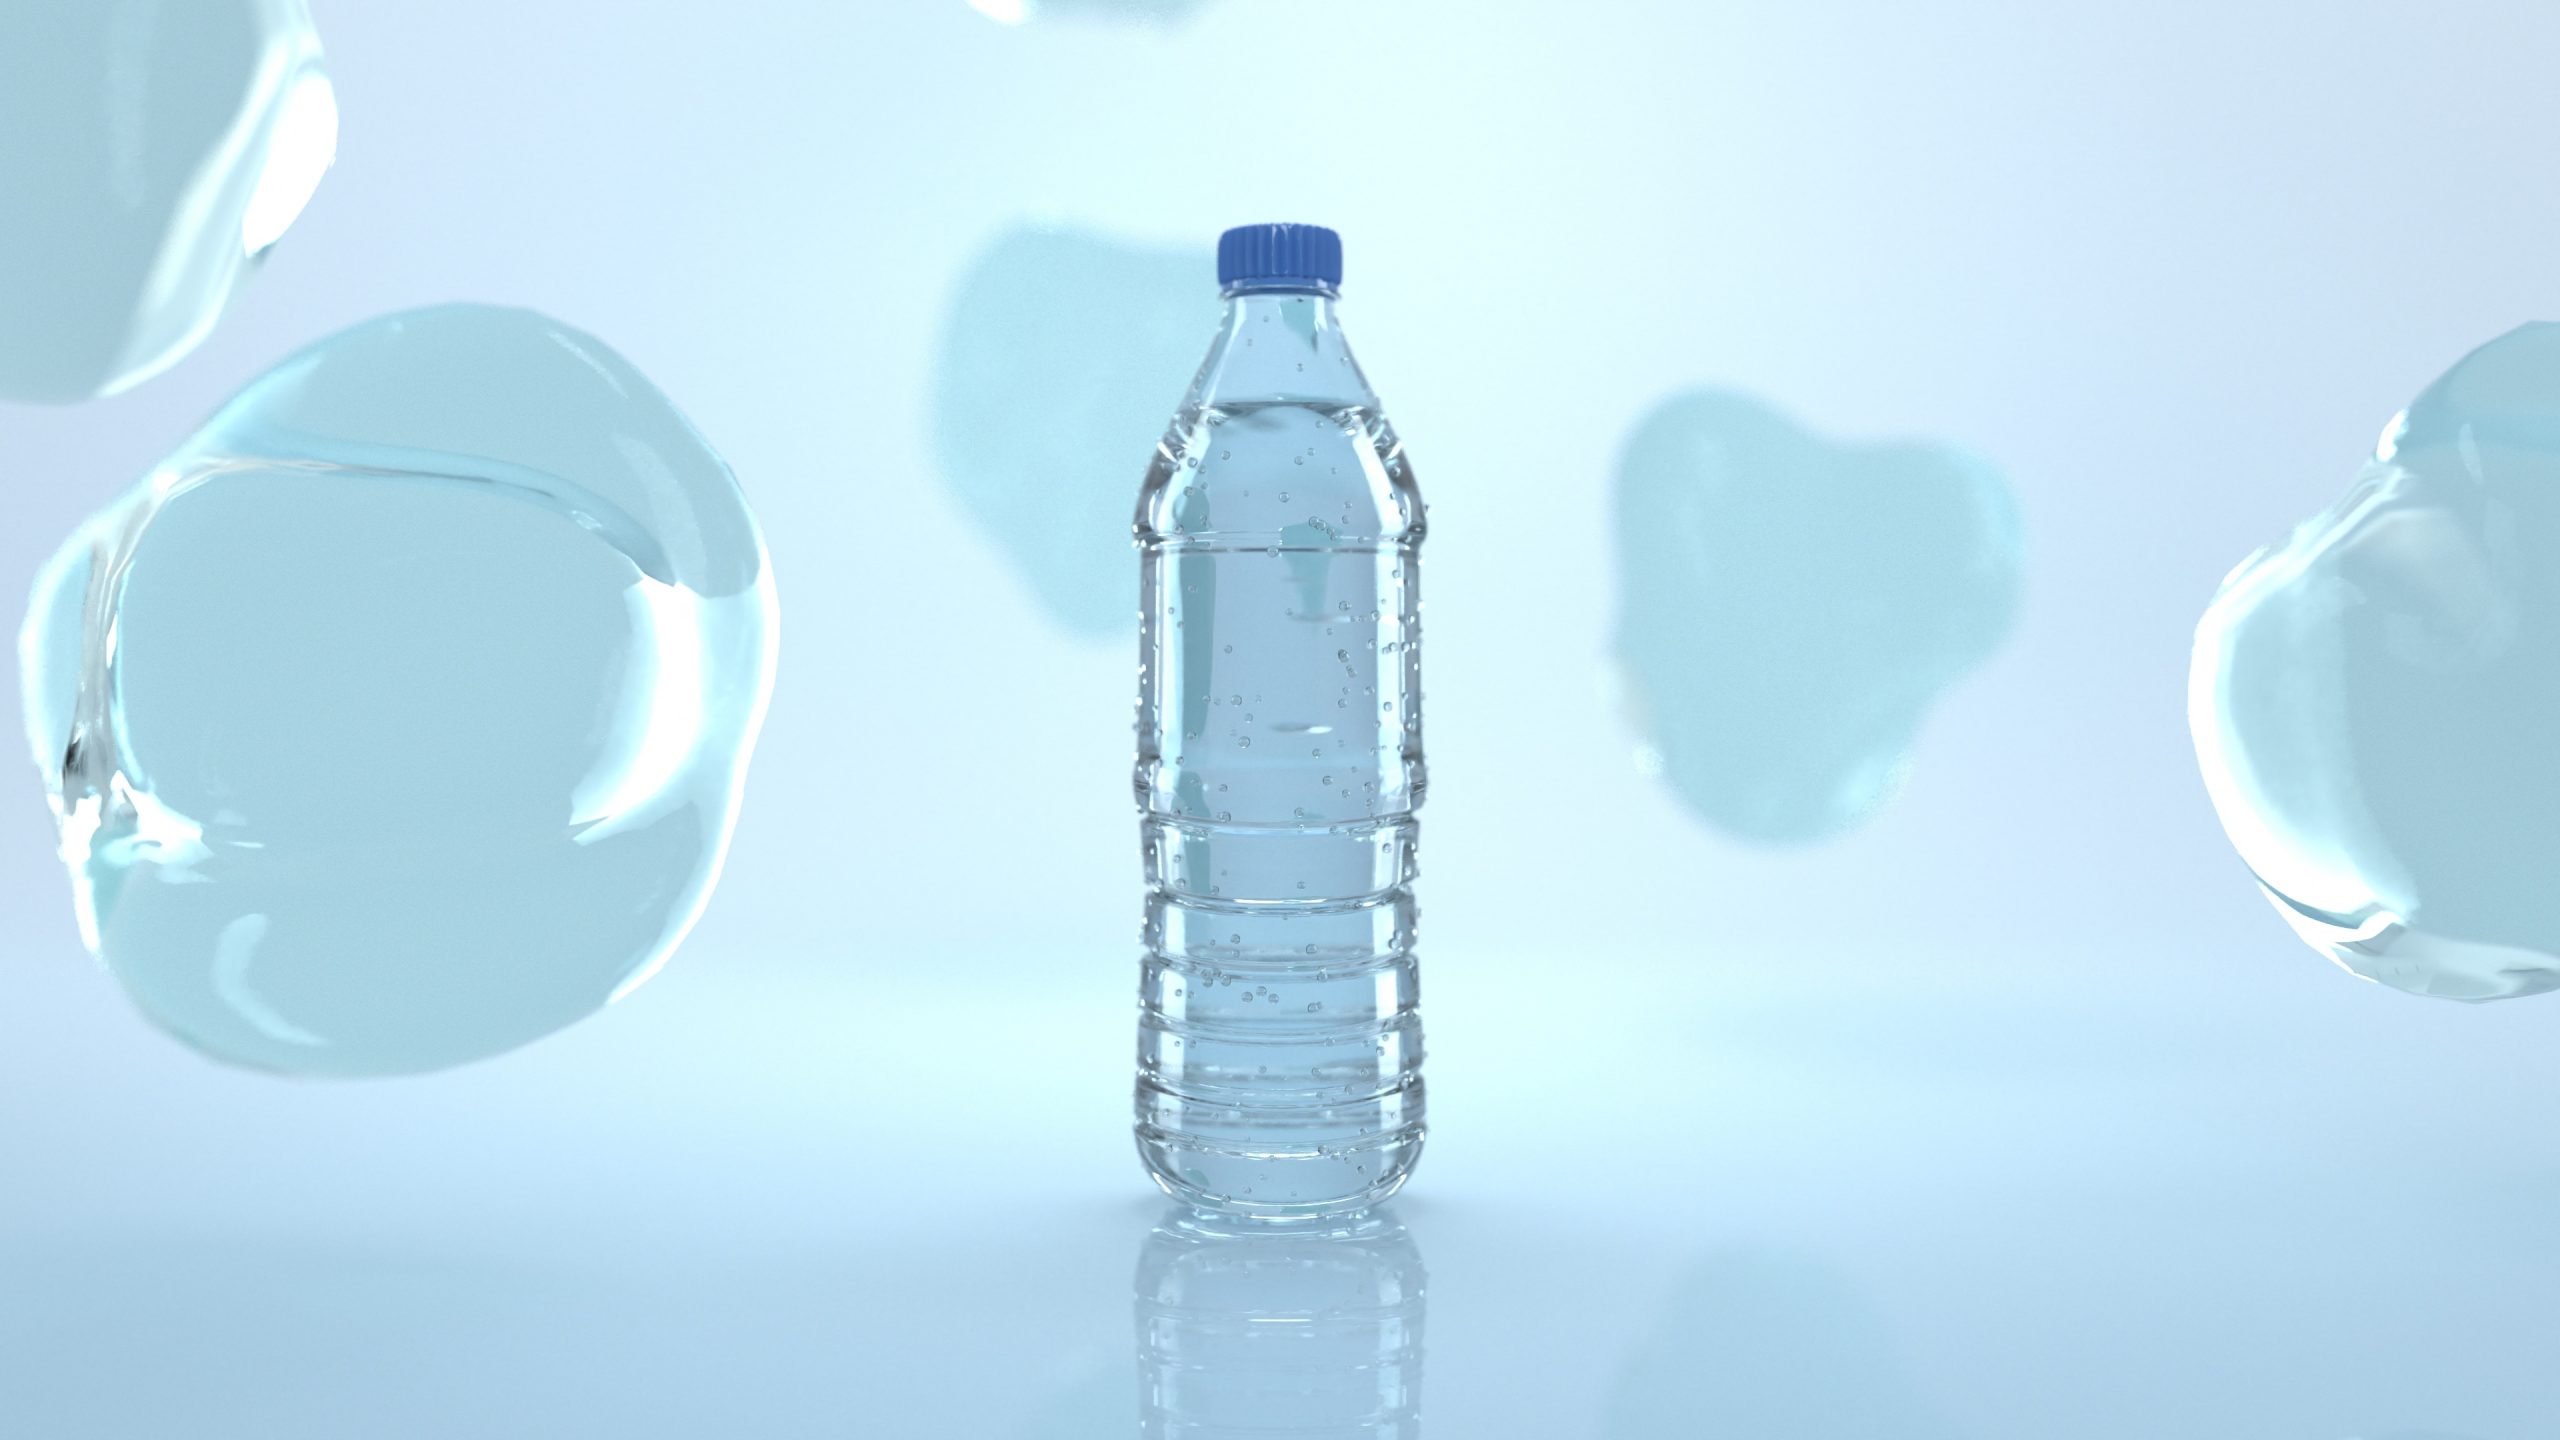 Nice realistic Water Bottle with 3D liquid Balls around. Crystal water inside bottle. Fresh light healthy drink. eco bottle with water drops on surface.